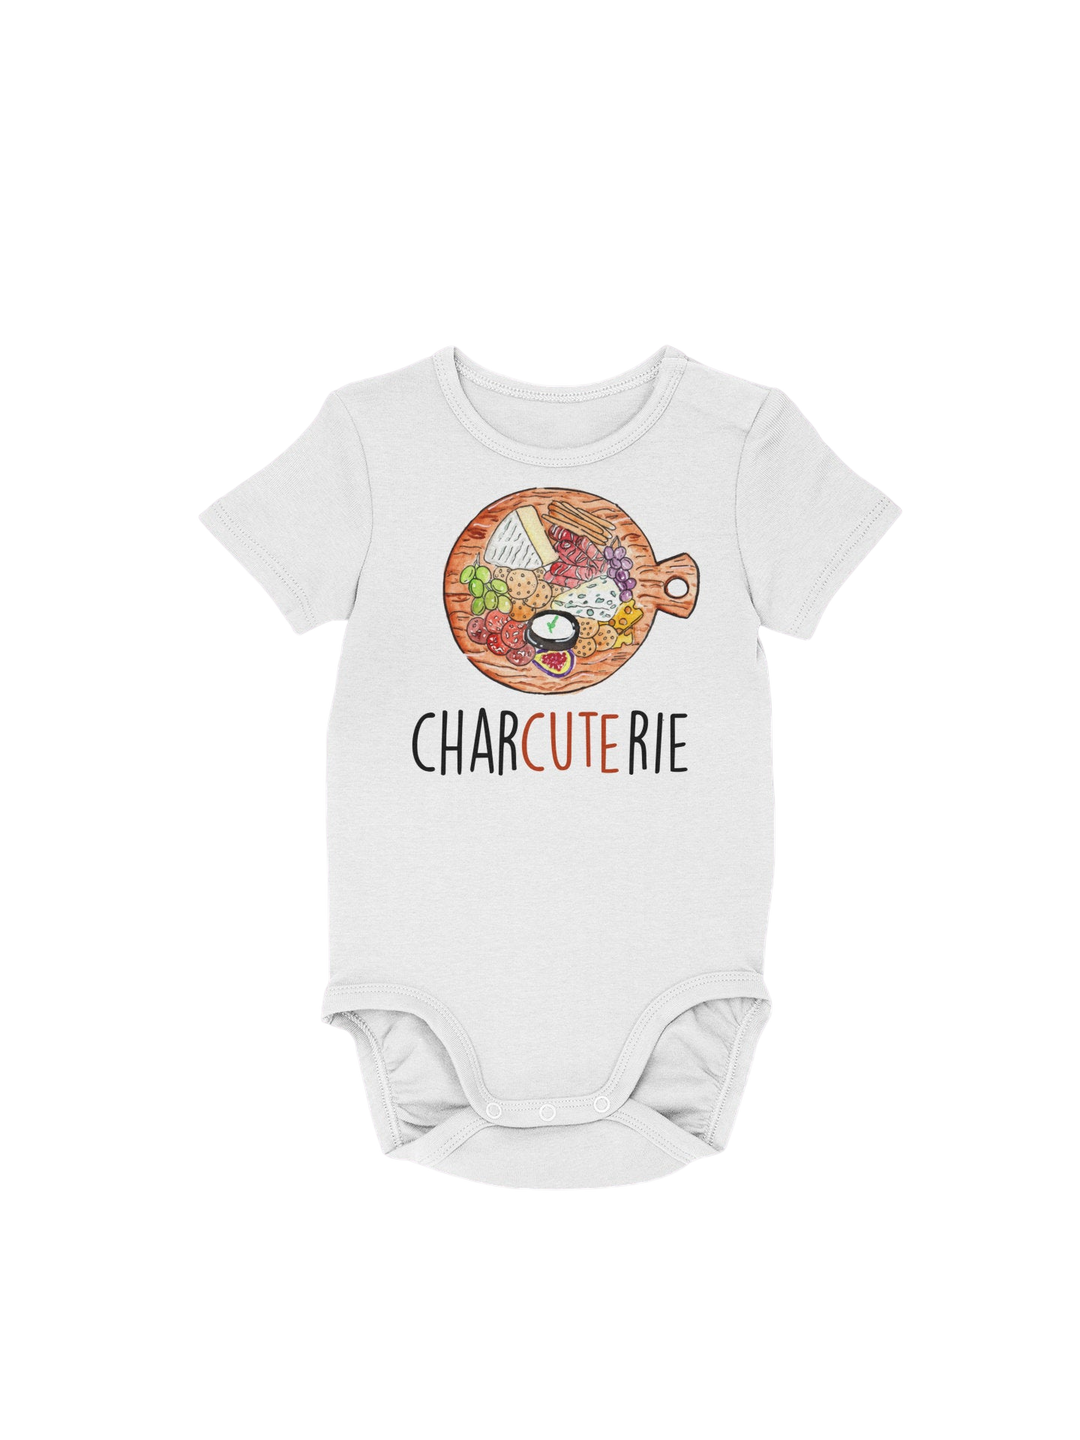 Charcuterie Cheese  - Baby Boy Girl Clothes Infant Bodysuit Funny Cute Newborn